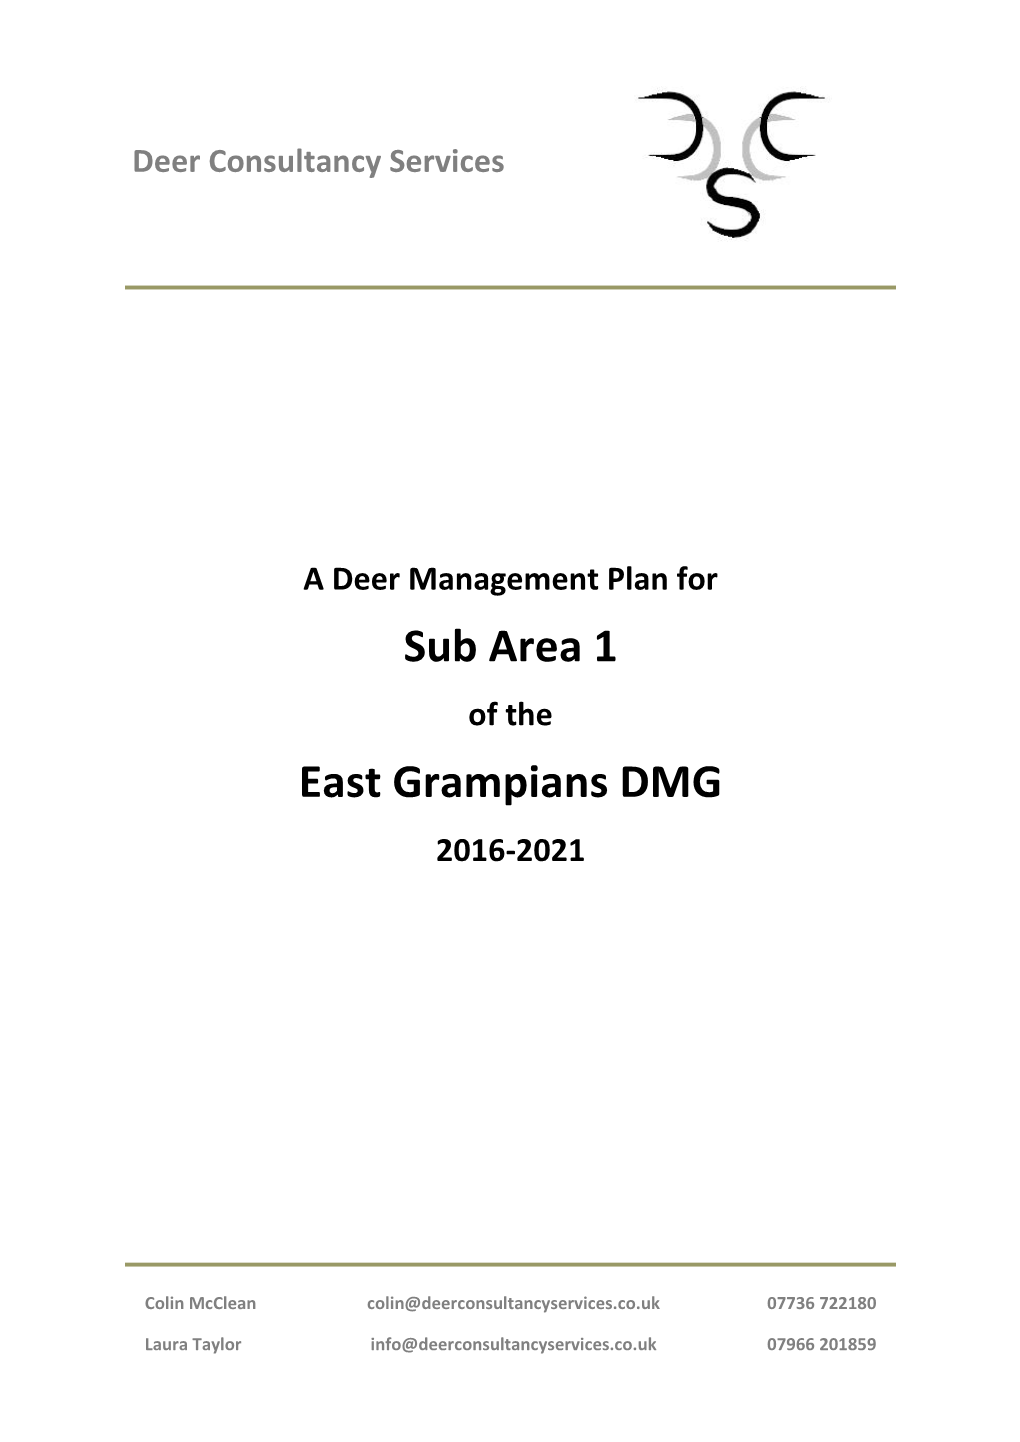 A Deer Management Plan for Sub Area 1 of the East Grampians DMG 2016-2021